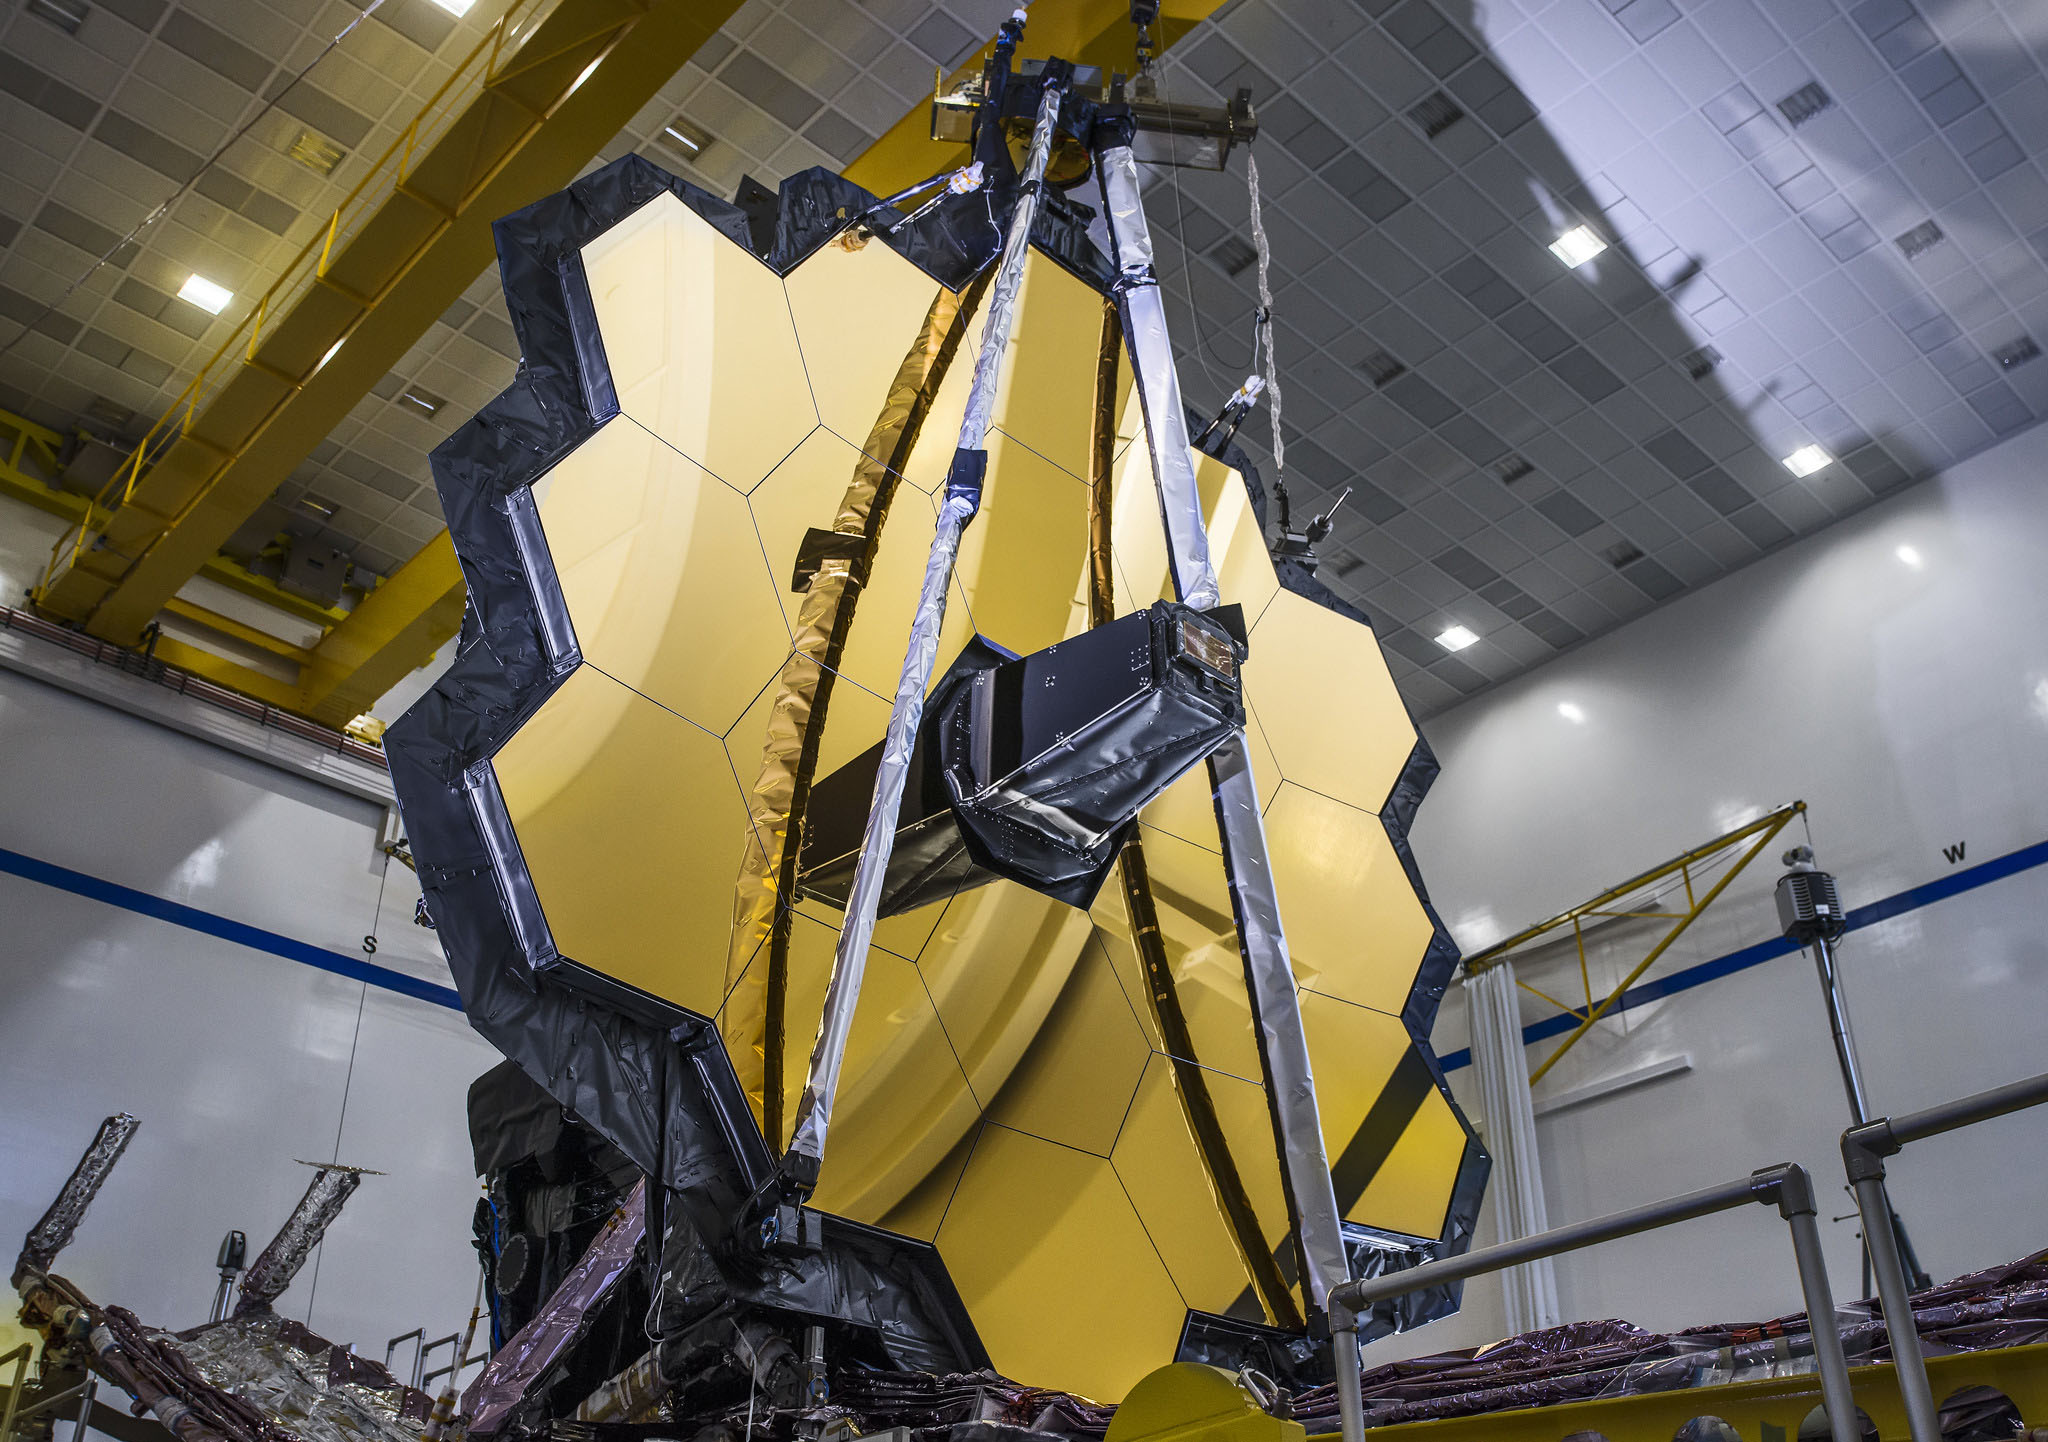 President Biden will reveal the first James Webb Space Telescope image at 5PM to..